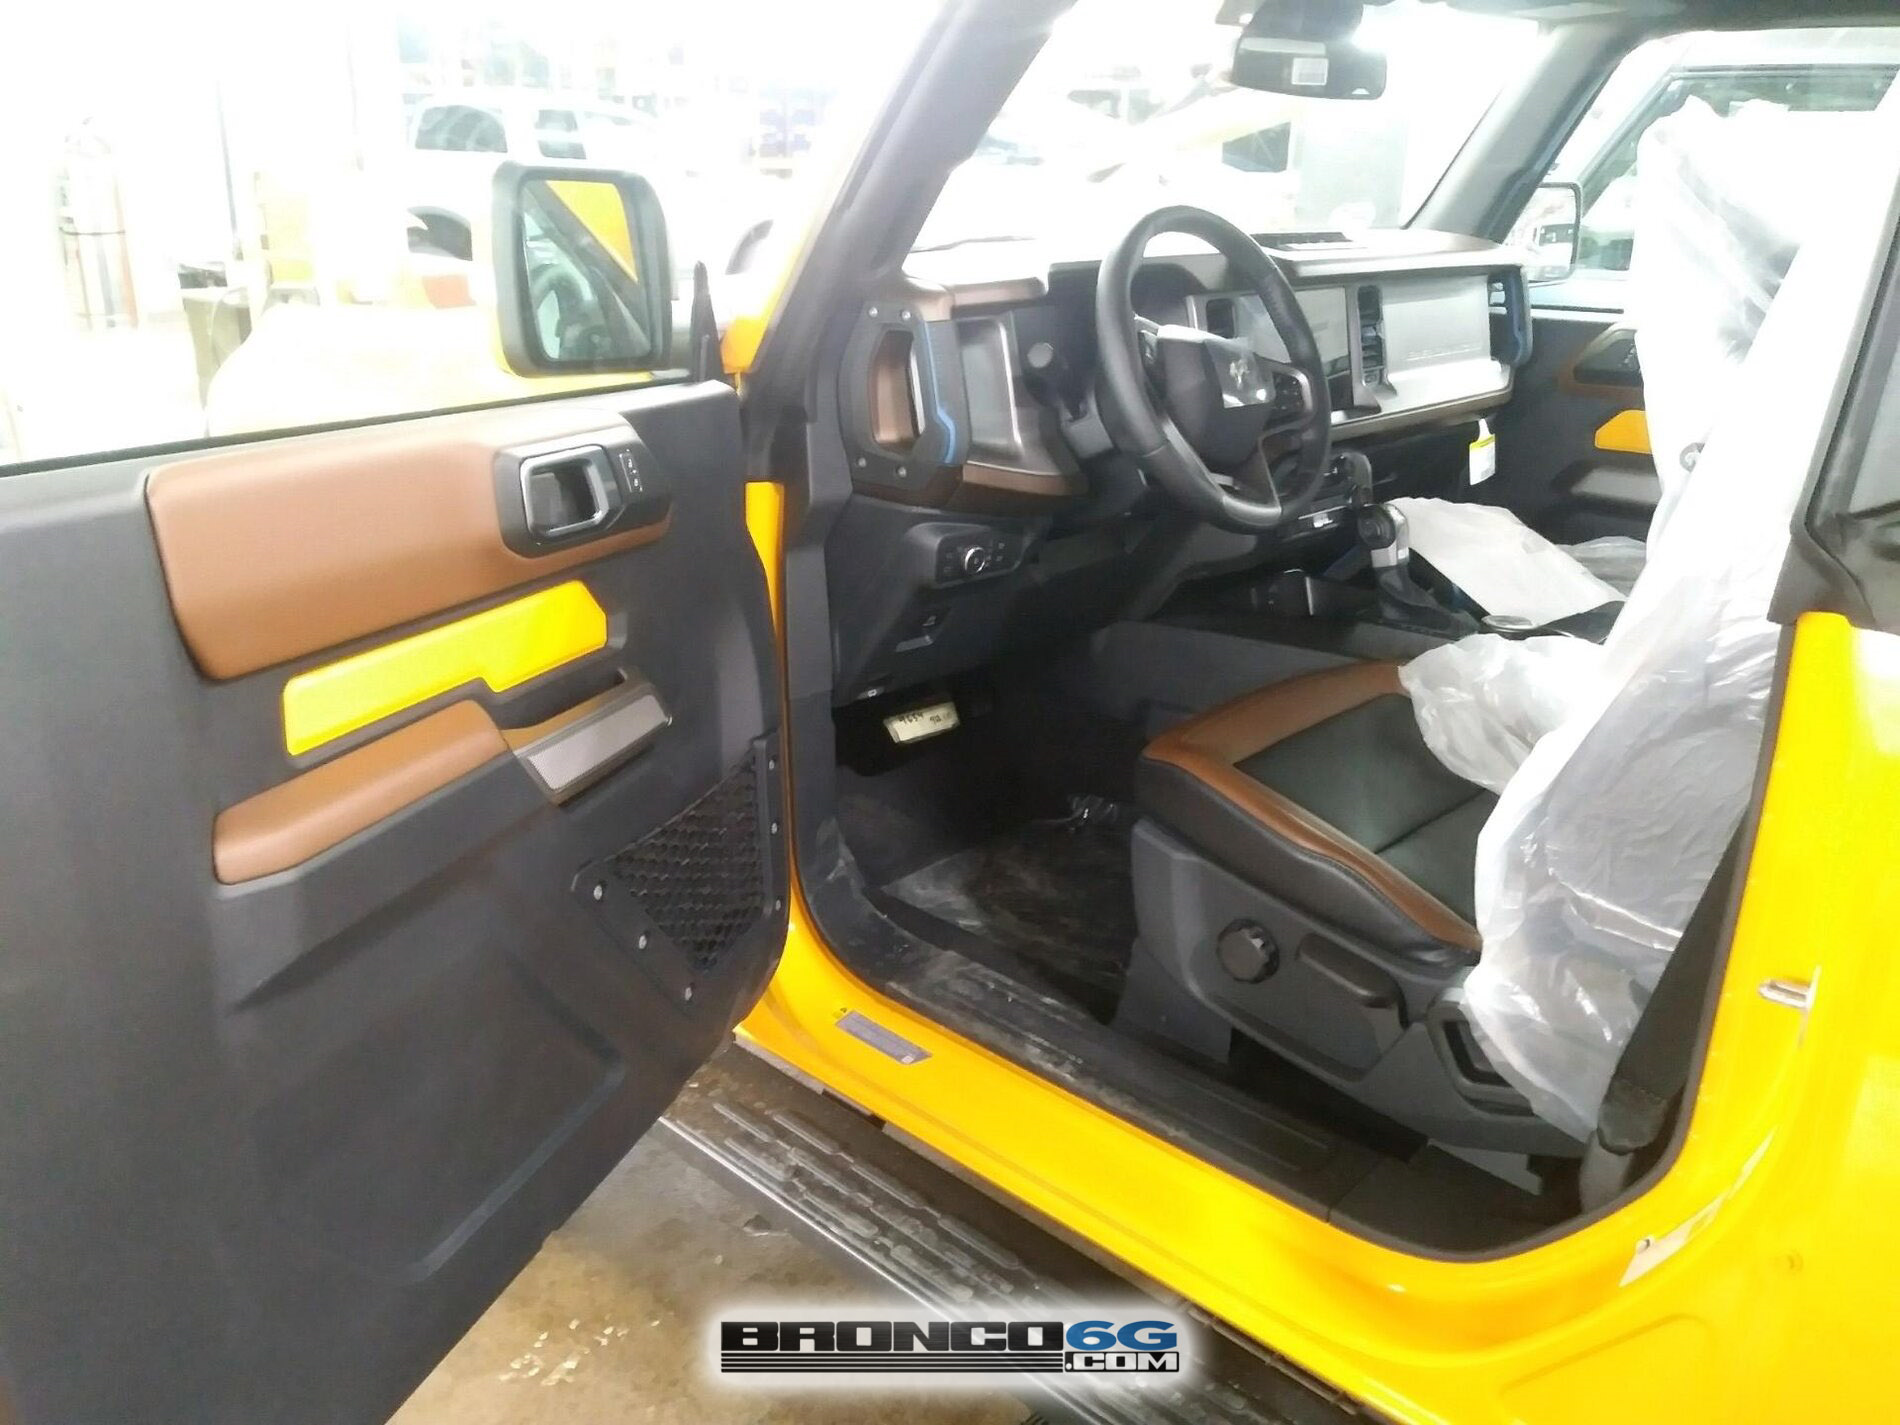 Ford Bronco 20+ Sandstone Cloth, Roast Cloth Seats Interior Pics From Factory ⚡?? 1608573216574